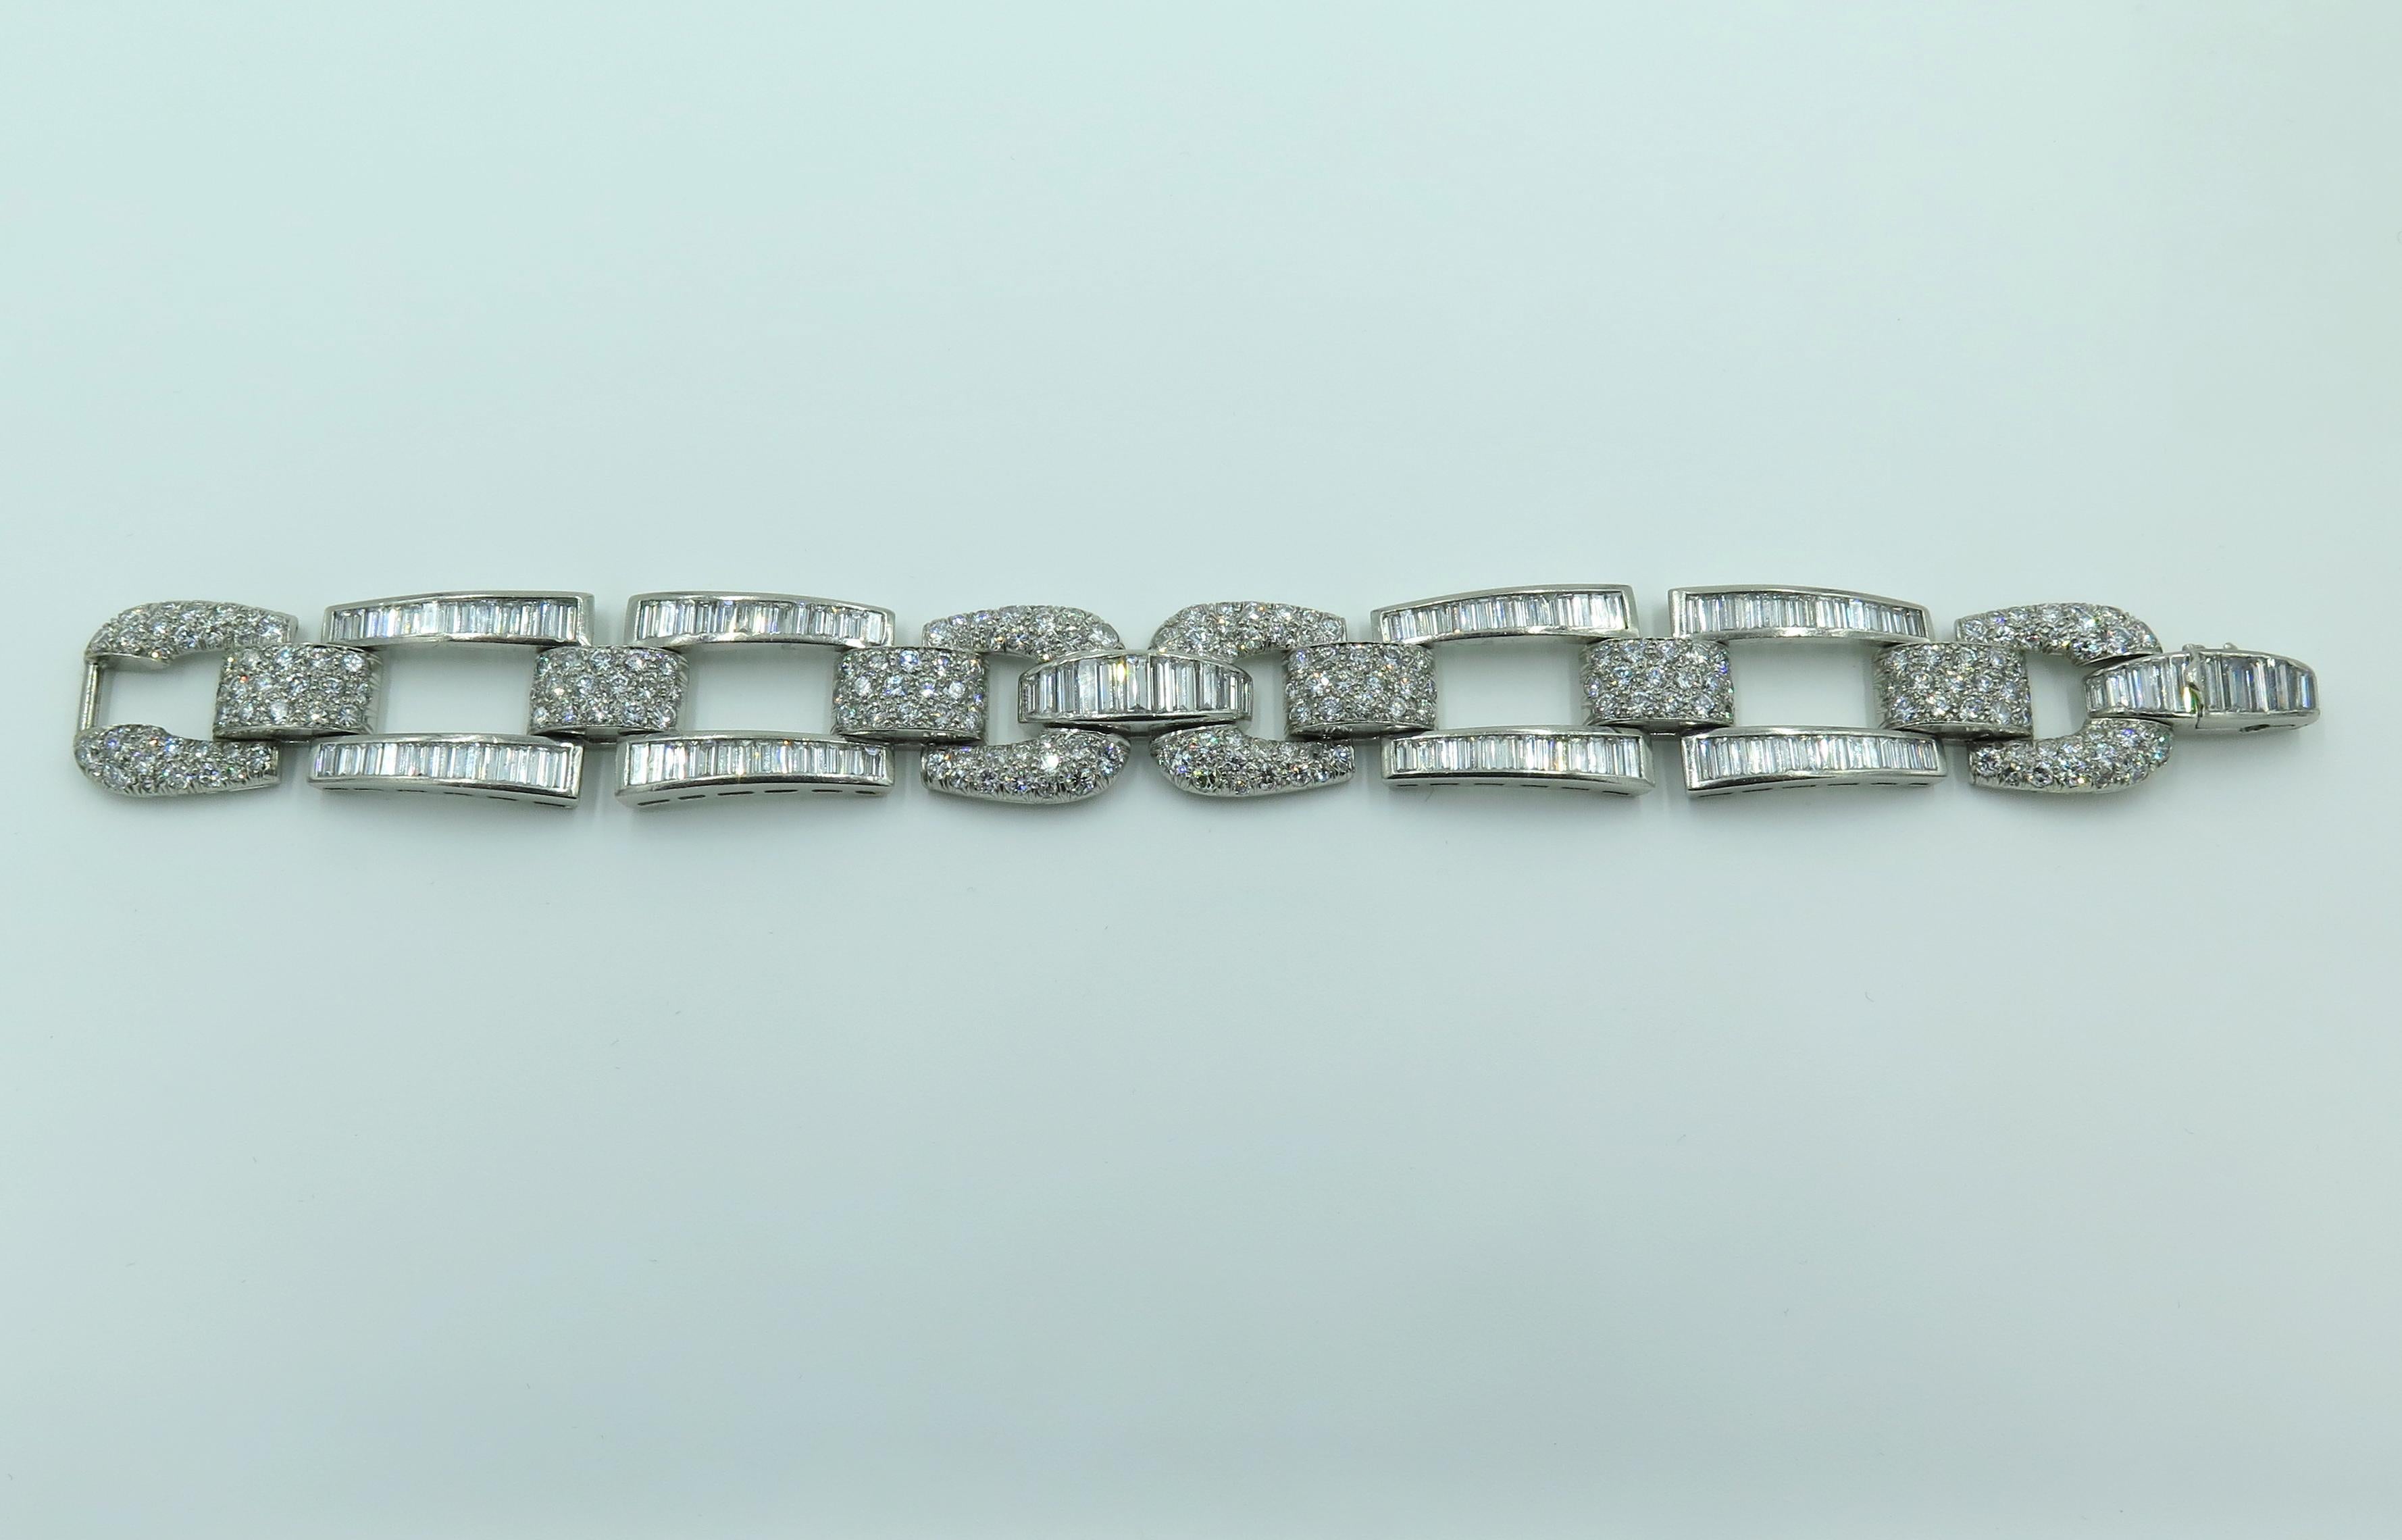 A platinum and diamond bracelet. Circa 1950. Designed as rectangular baguette cut diamond set links,  alternating with pave set horse shoe shaped links and spacers. One hundred and thirty six baguette cut diamonds weigh approximately 13.00 carats